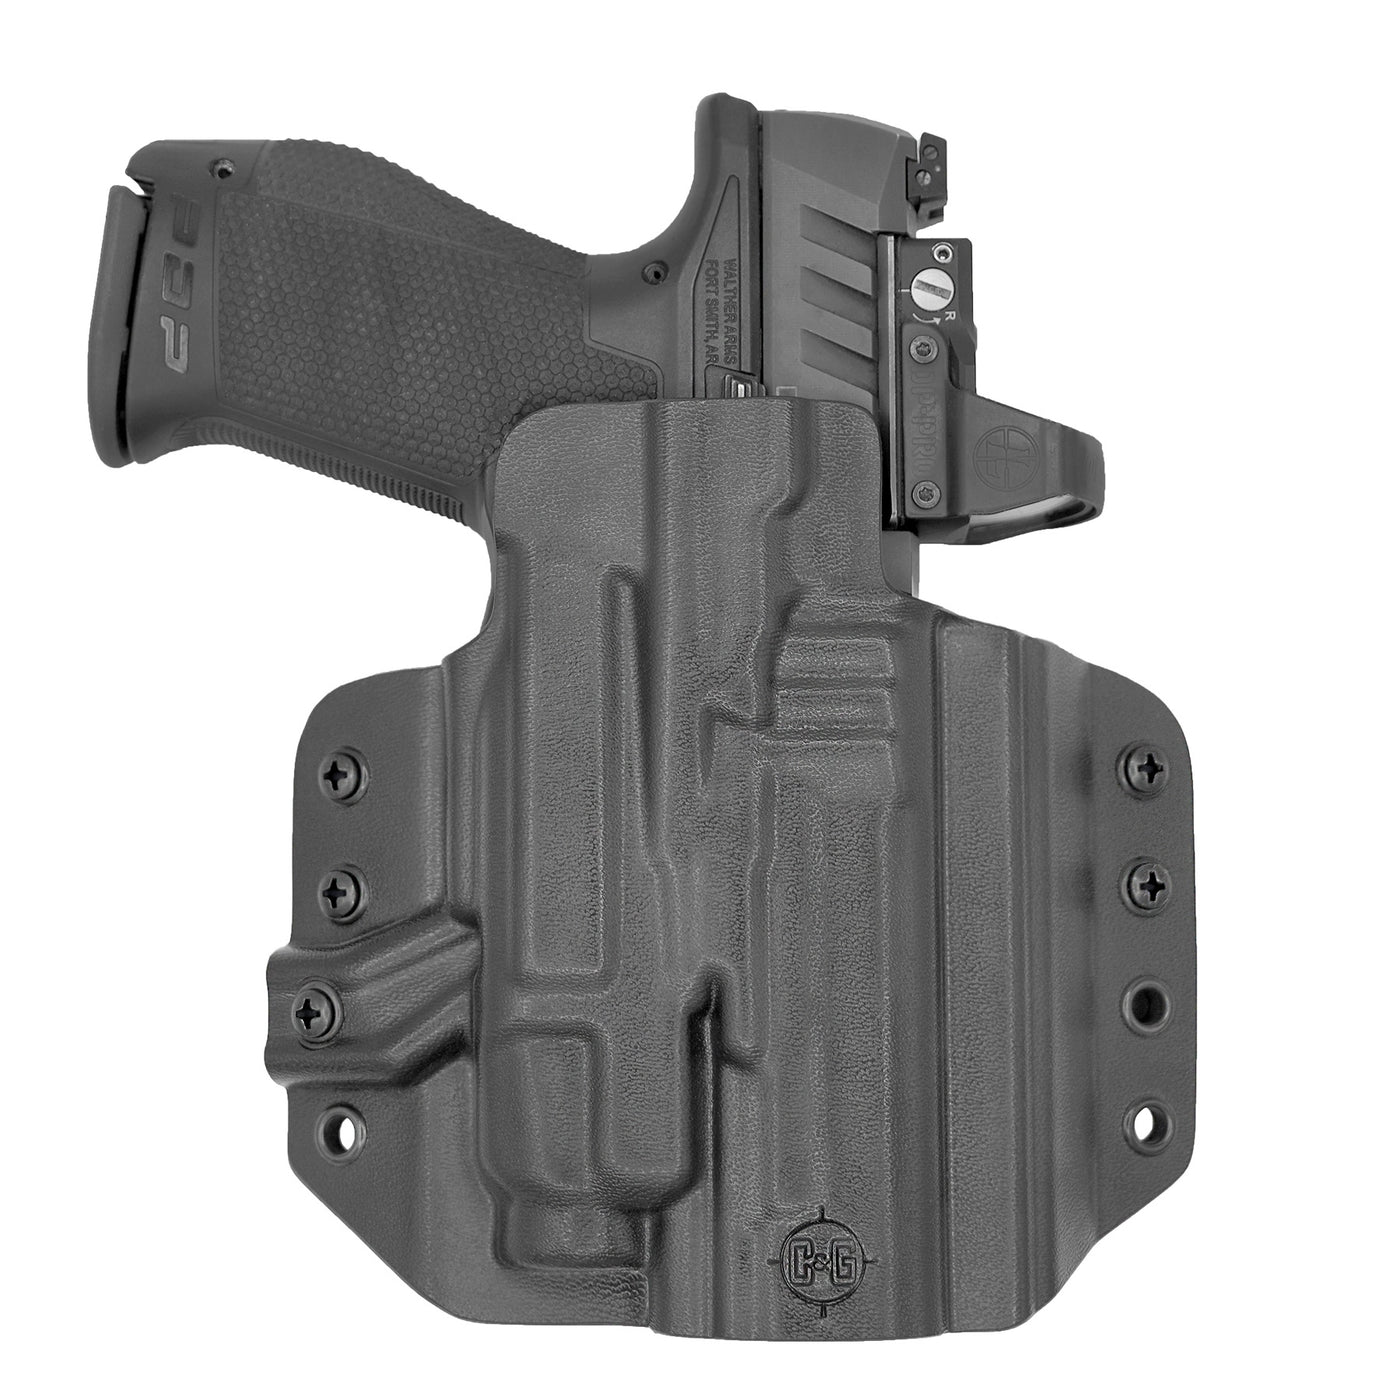 C&G Holsters custom OWB Tactical Beretta M9A3 Streamlight TLR7/A in holstered position